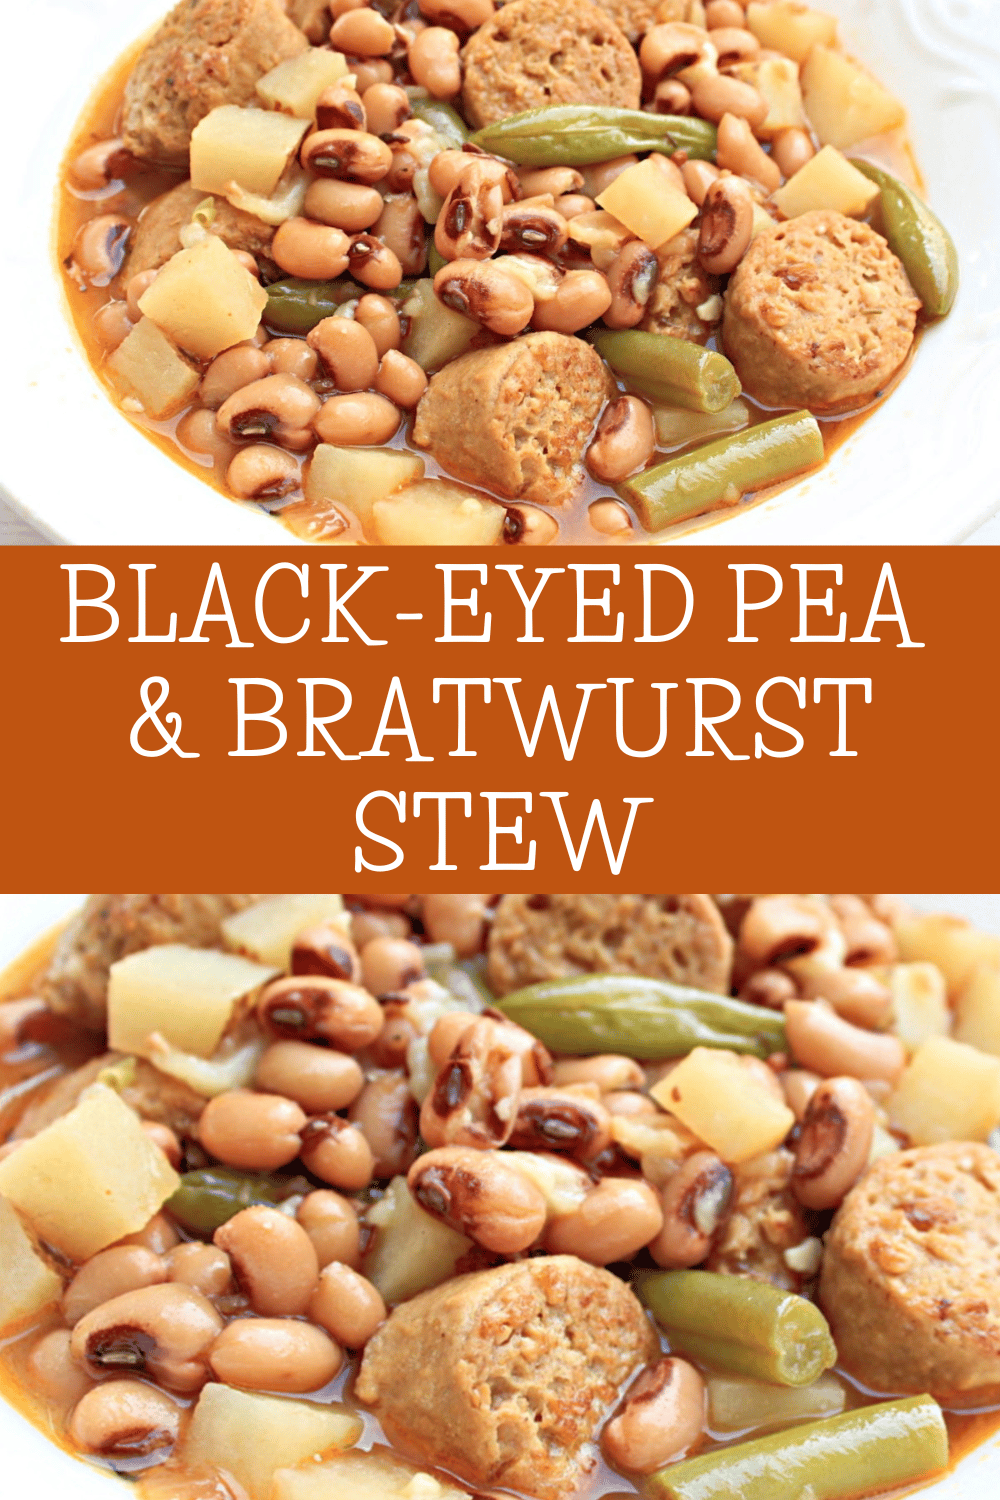 Vegan Black-Eyed Pea and Bratwurst Stew ~ Easy to make with plant-based ingredients and perfect for Oktoberfest, game days, and all your fall celebrations! via @thiswifecooks